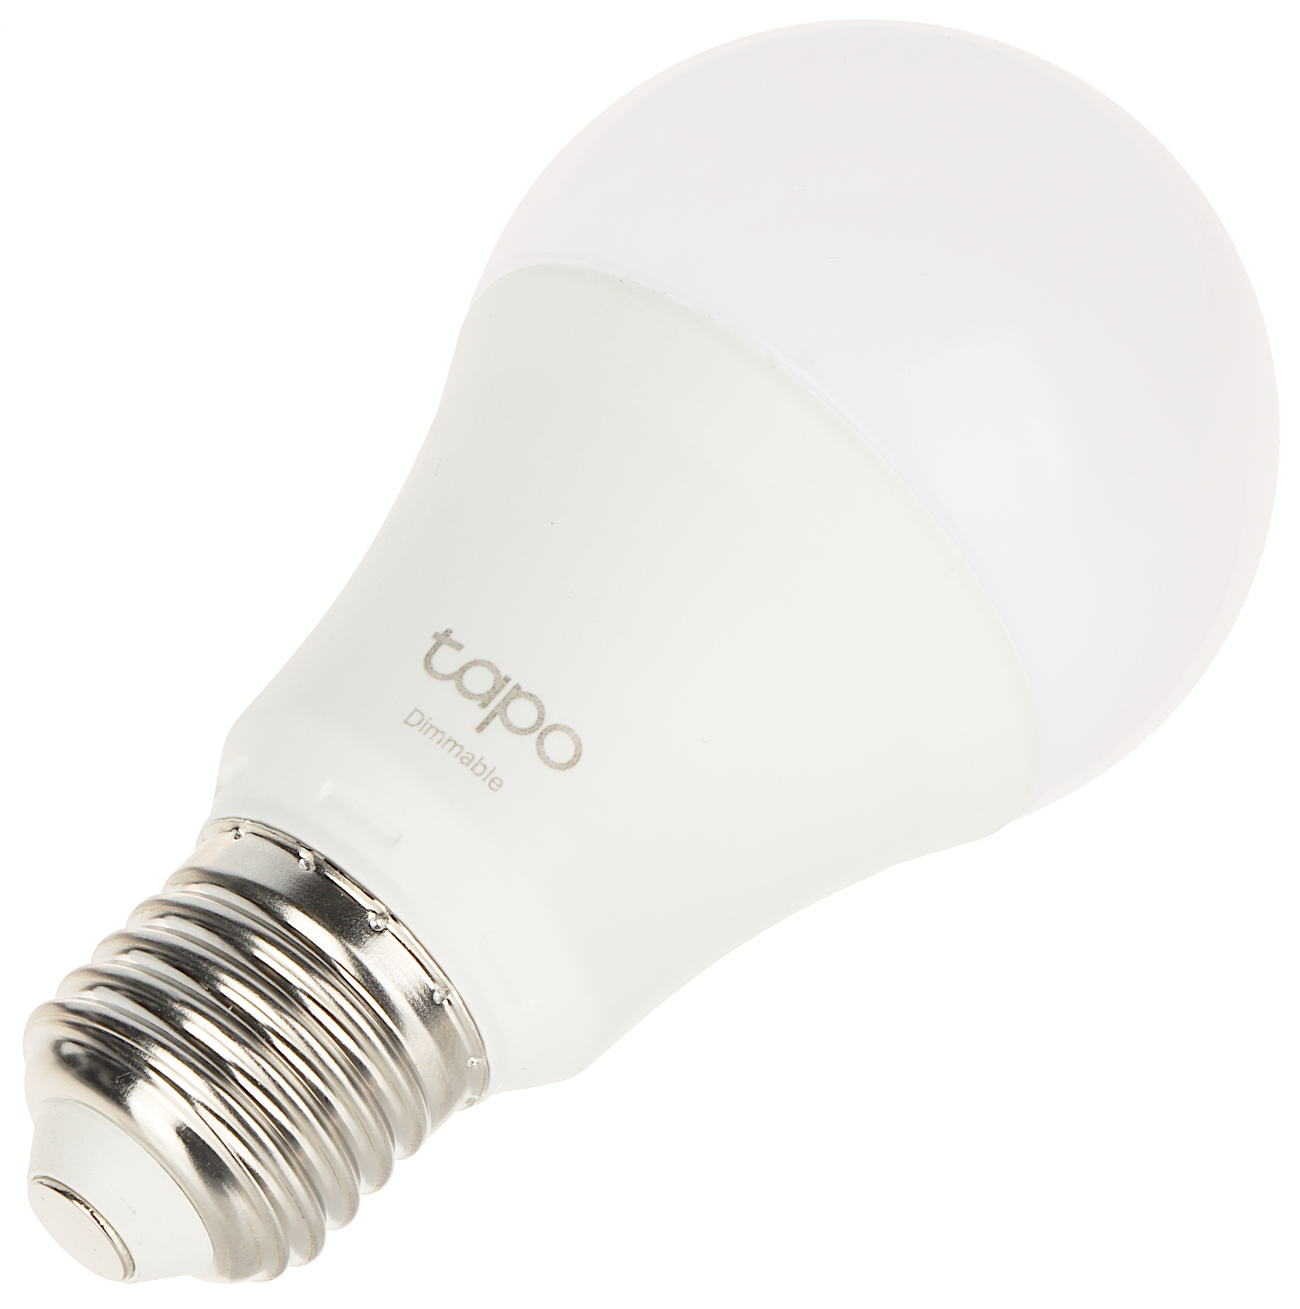 SMART LIGHT BULB WITH DIMMER TL-TAPO-L510E Wi-Fi TP-LINK - Lighting - Delta